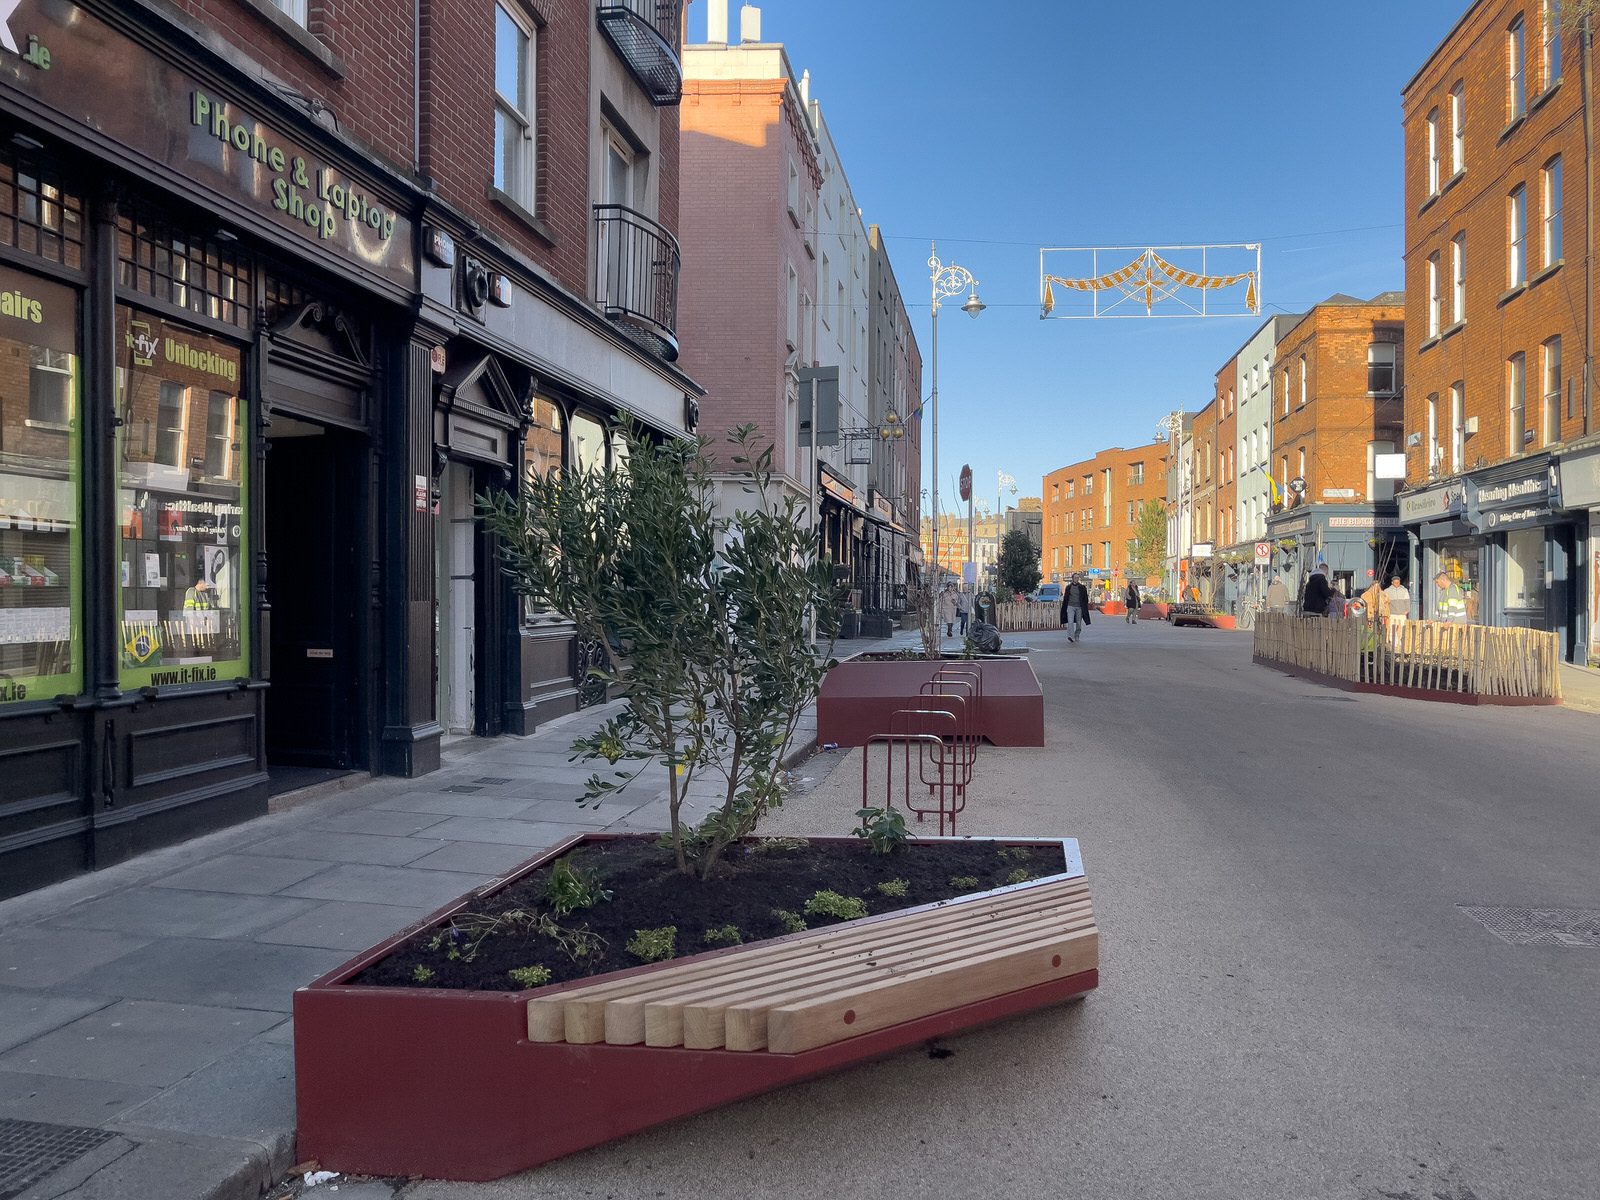 THE NEW STREET FURNITURE AND THE CHRISTMAS TREE [HAVE ARRIVED IN CAPEL STREET]-225857-1